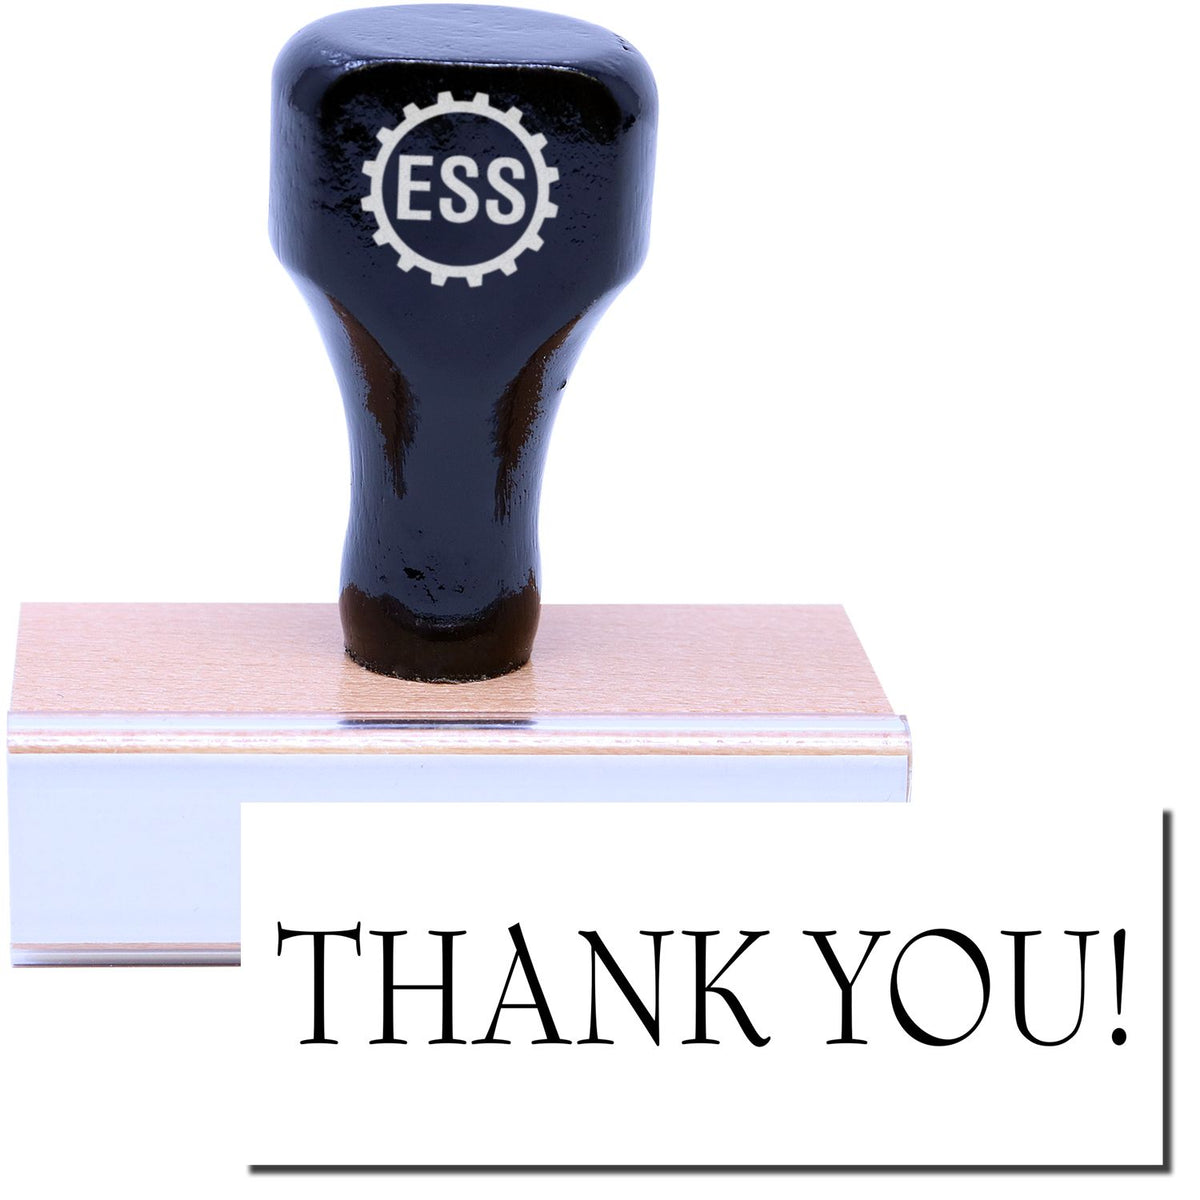 A stock office rubber stamp with a stamped image showing how the text &quot;THANK YOU&quot; with an exclamation sign is displayed after stamping.